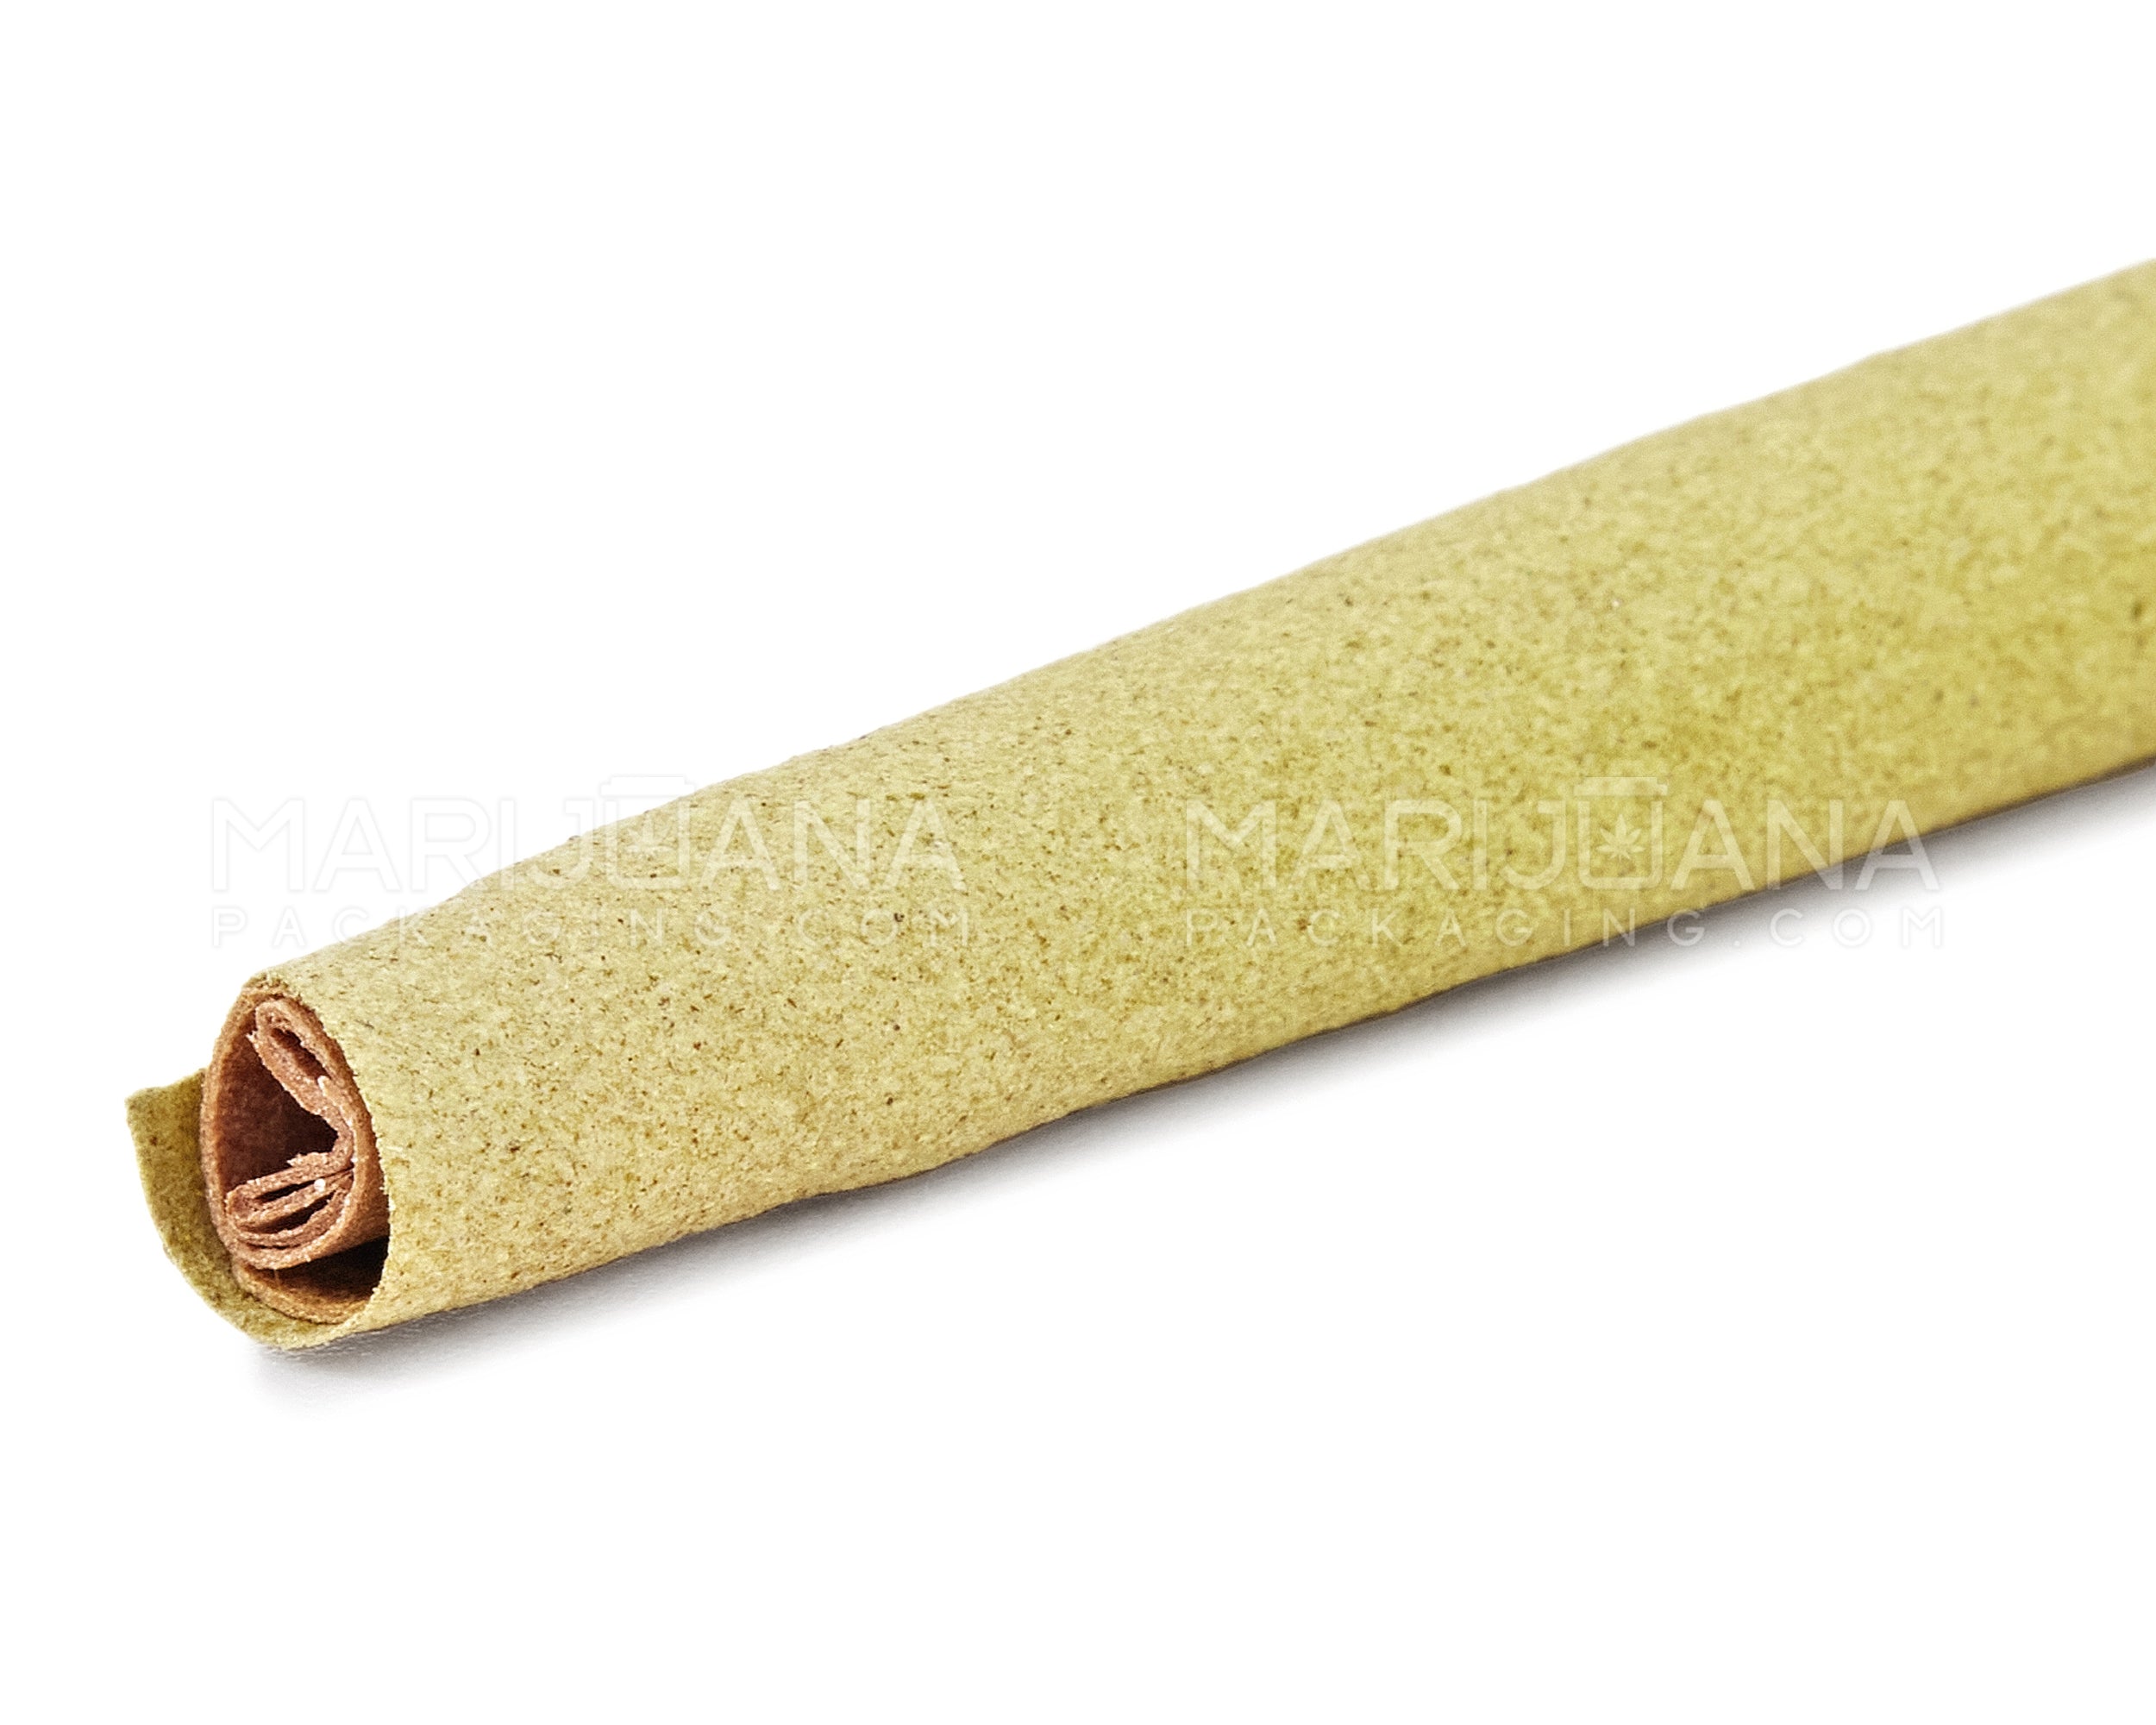 KUSH | 'Retail Display' Terpene Infused Herbal Conical Wraps | 160mm - SFV OG - 12 Count - 8